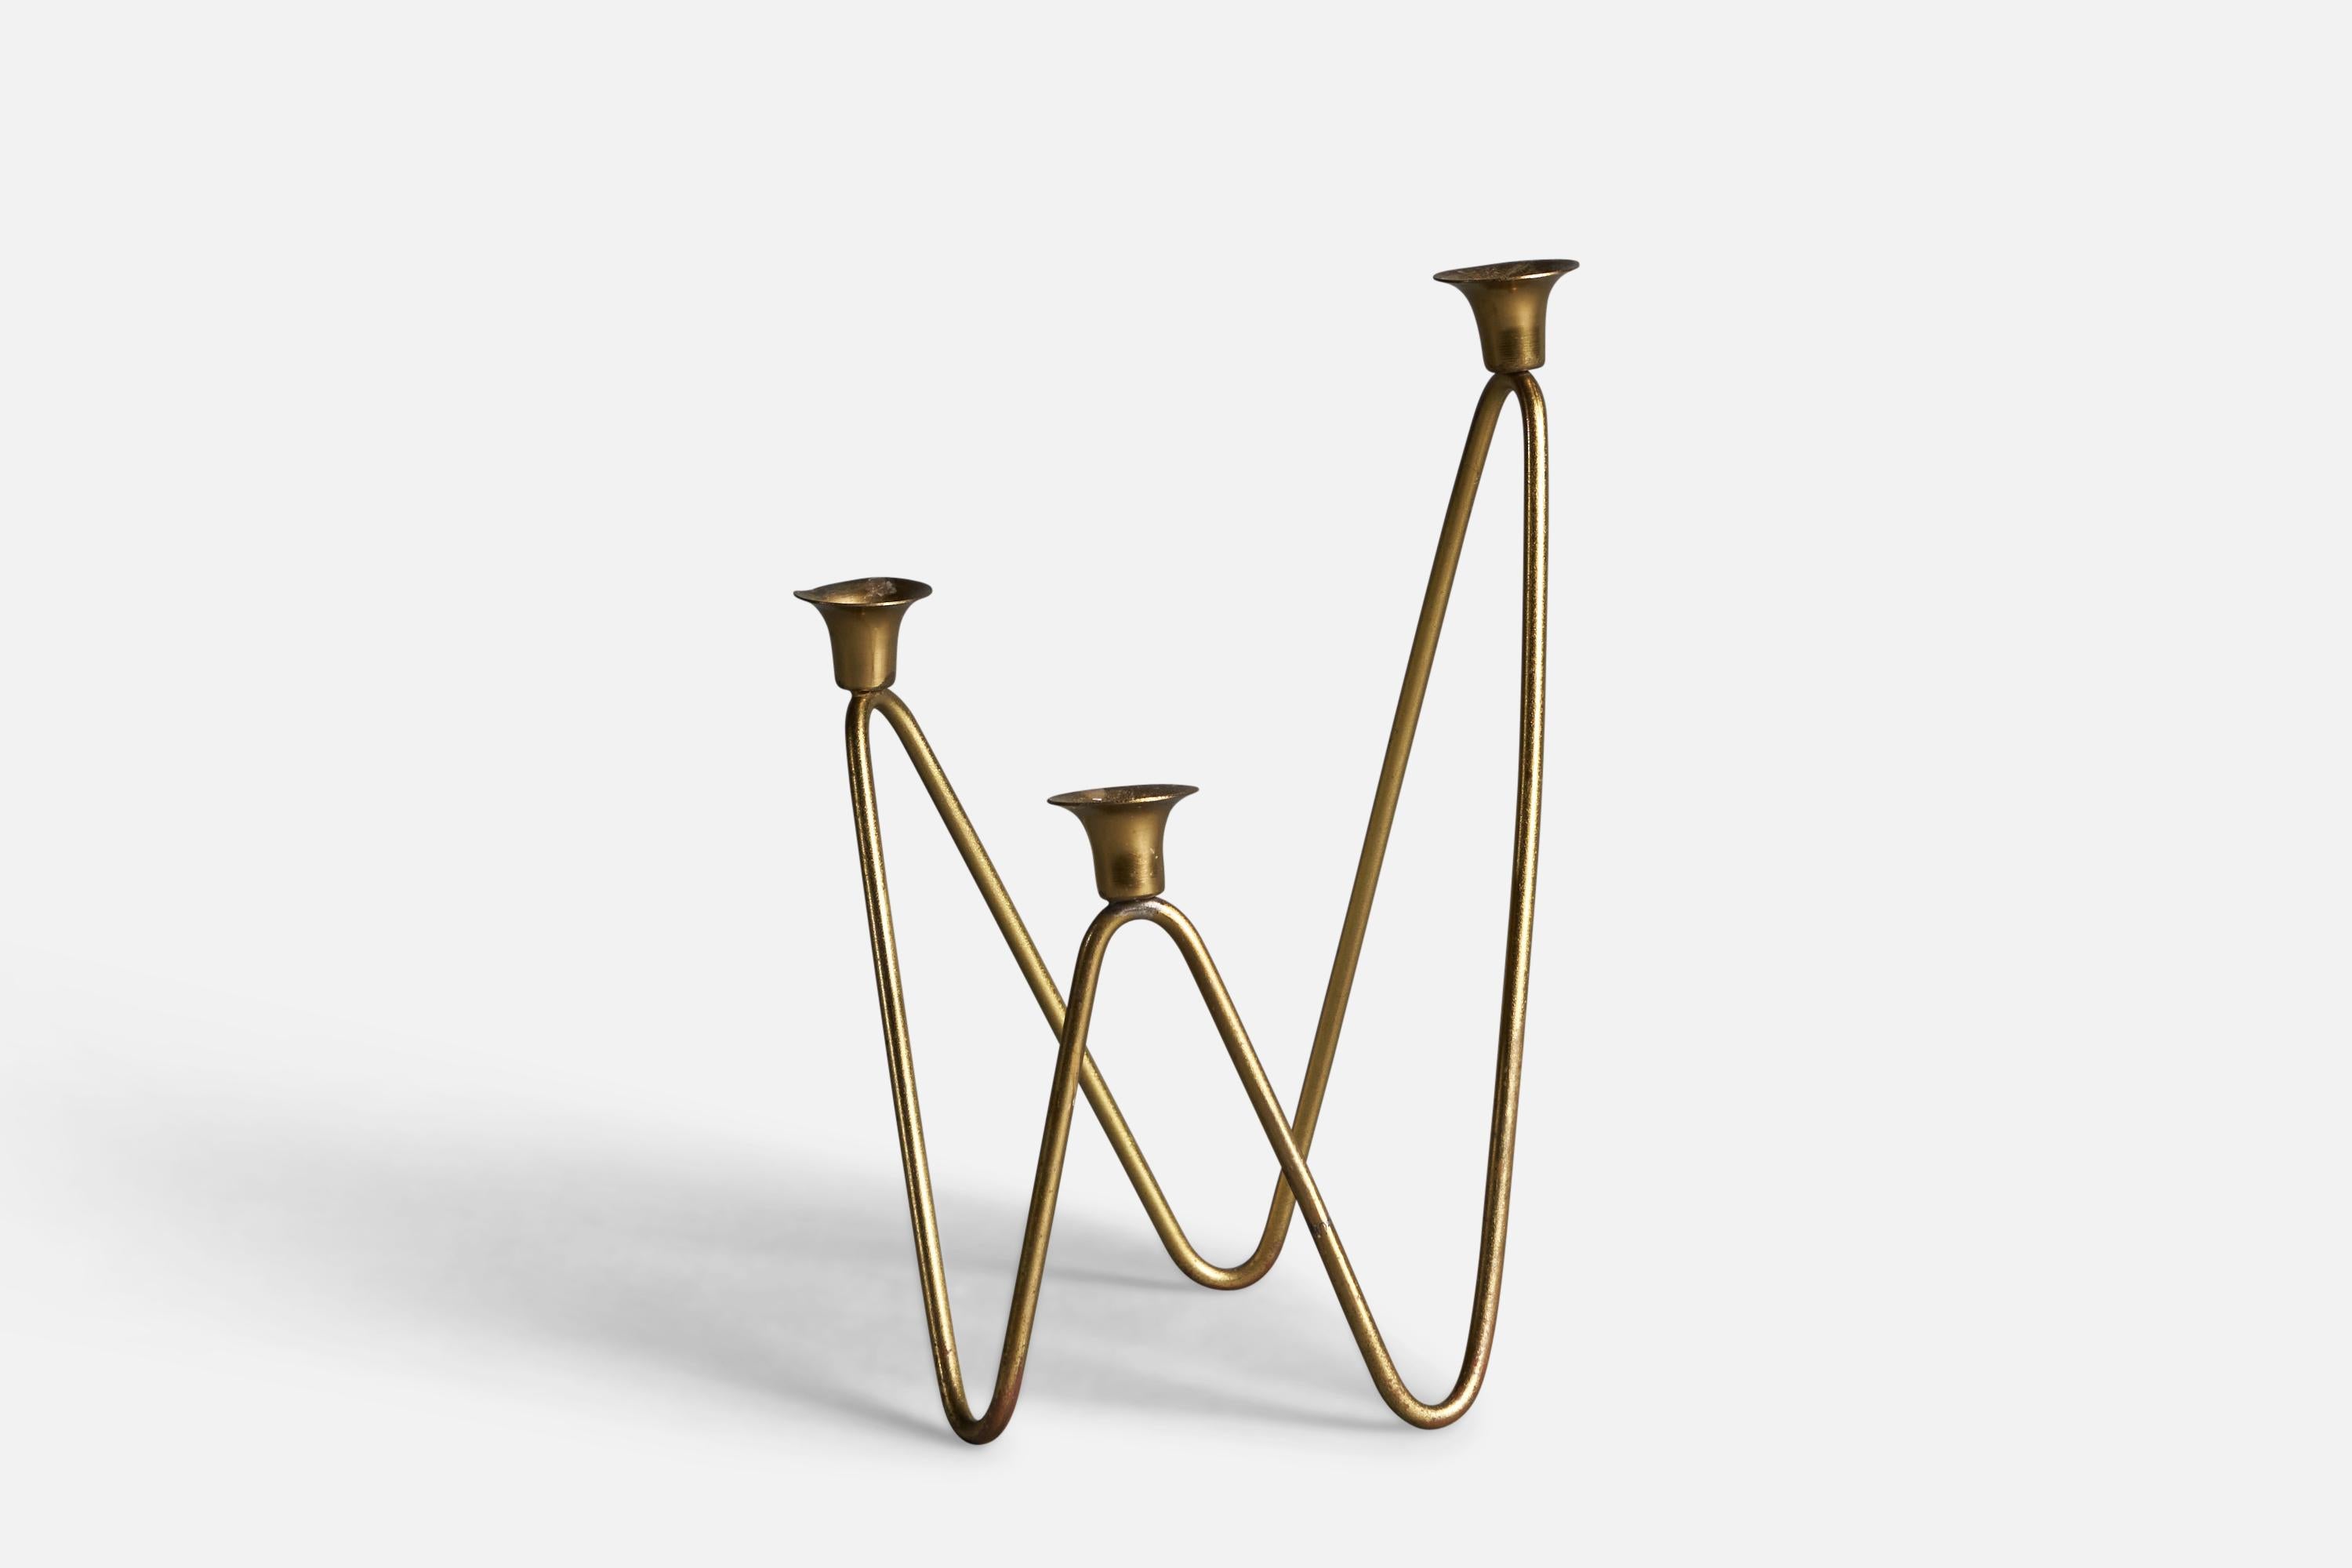 A small brass candelabra designed and produced in Sweden, 1940s.